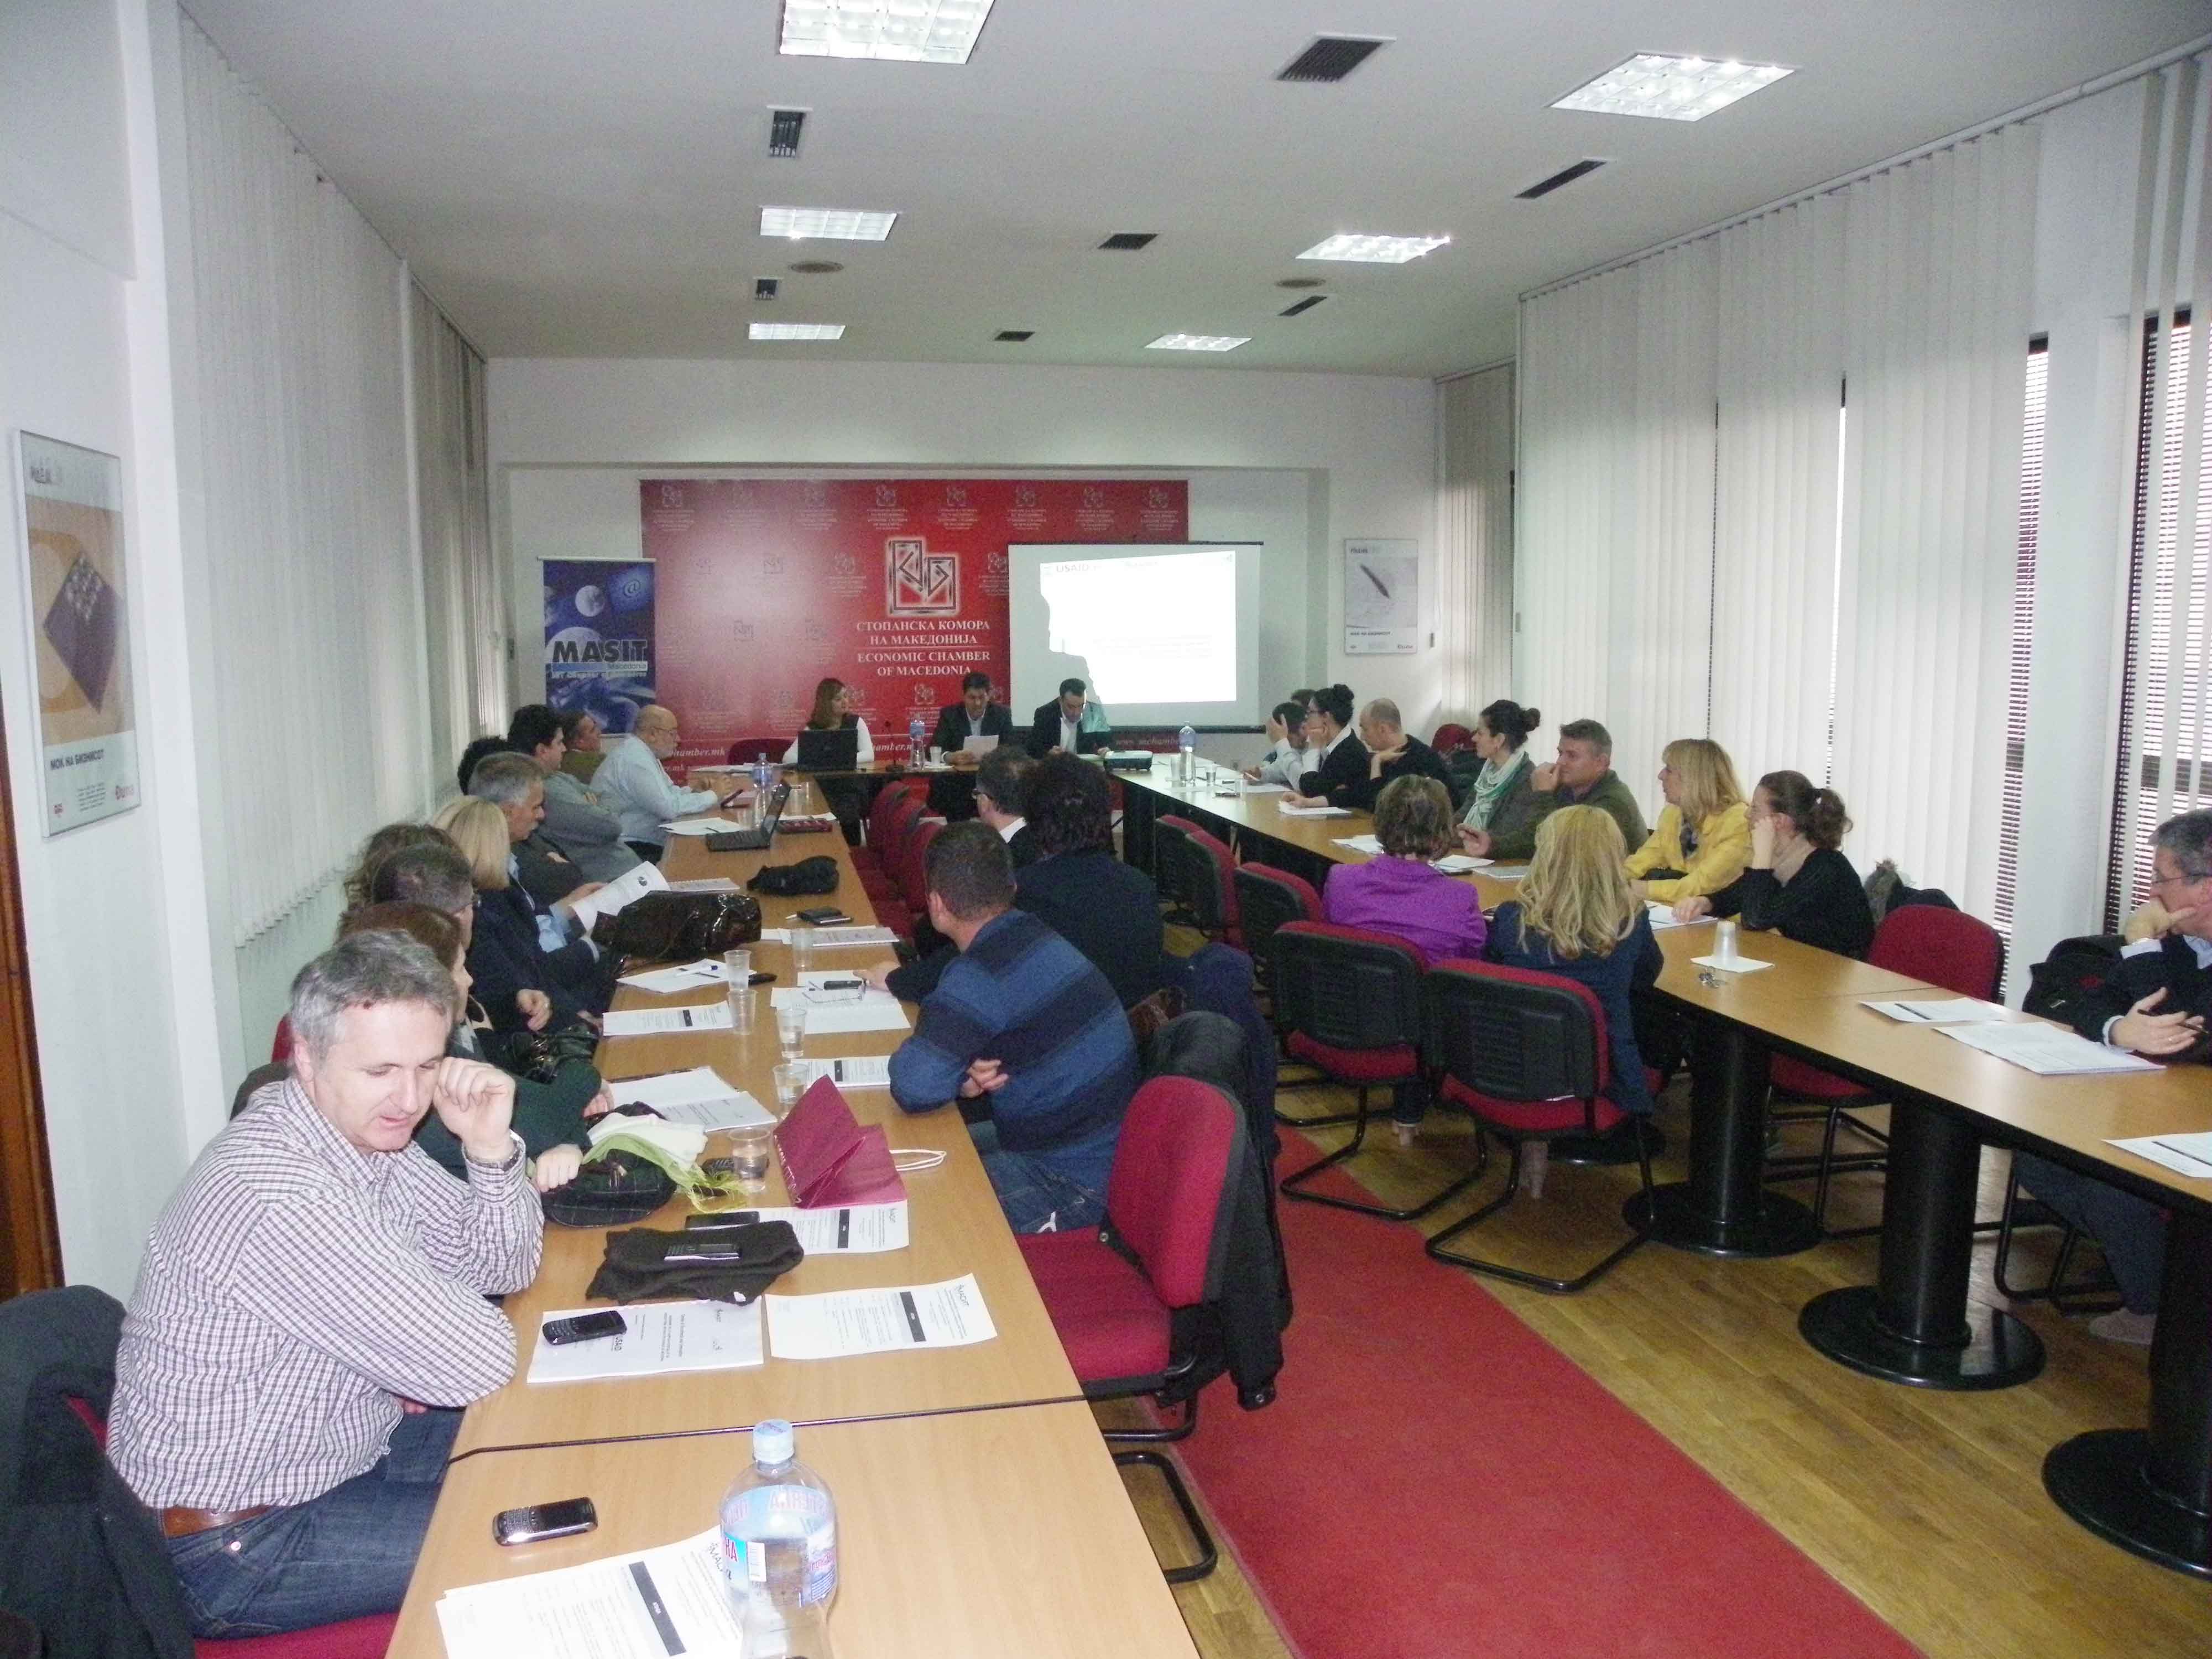 ICT potential in agriculture in Republic of Macedonia